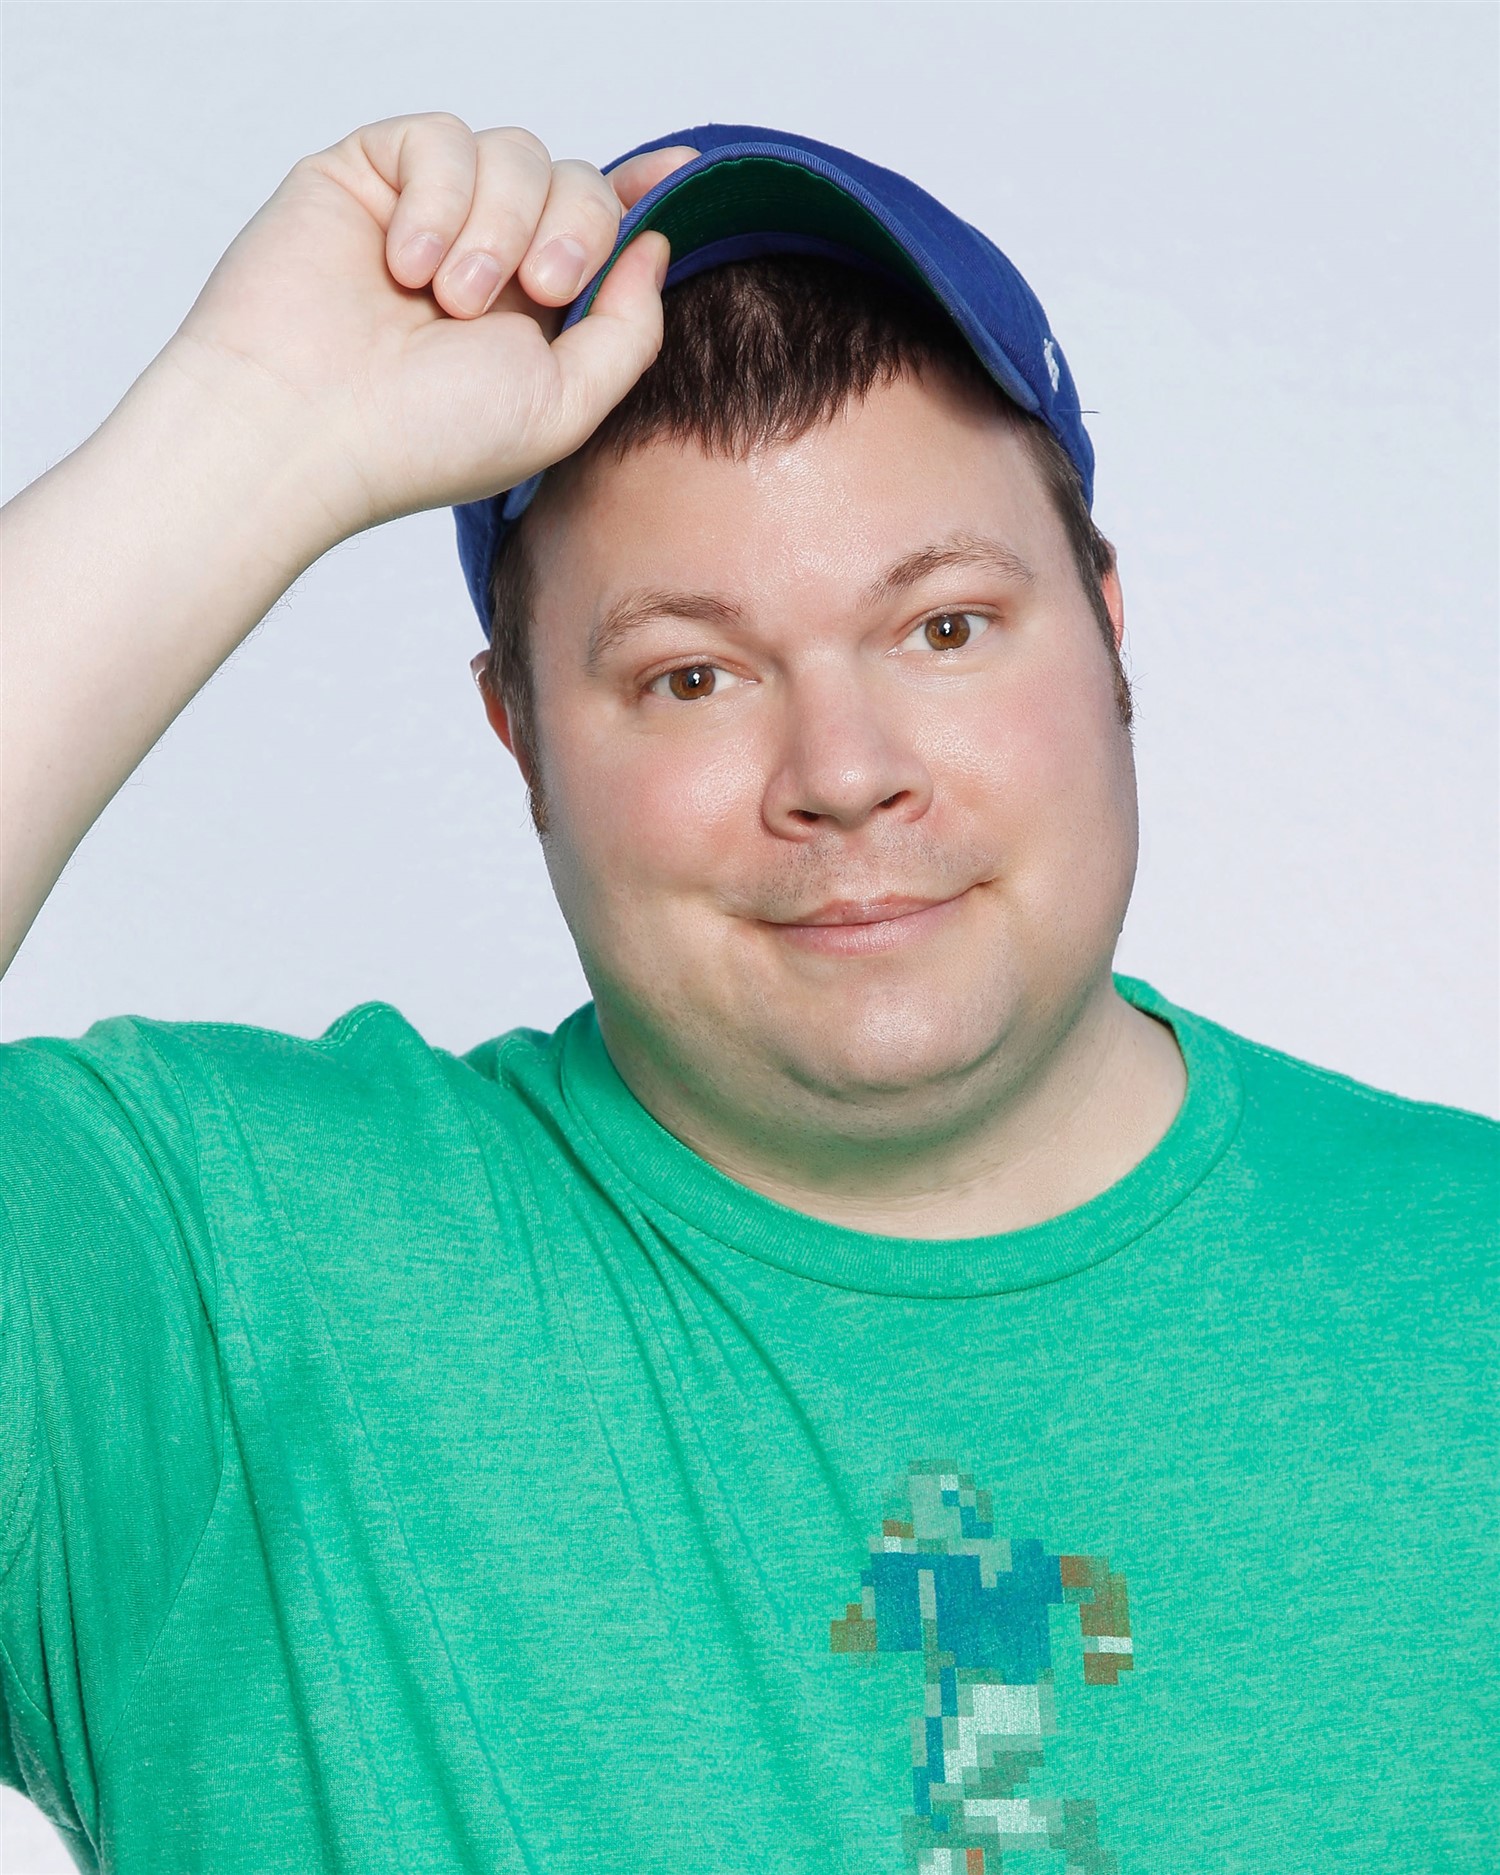 John Caparulo - Fri. at 7:30PM Funny Stop Comedy Club on Aug 25, 19:30@Funny Stop Comedy Club - Buy tickets and Get information on Funny Stop funnystop.online